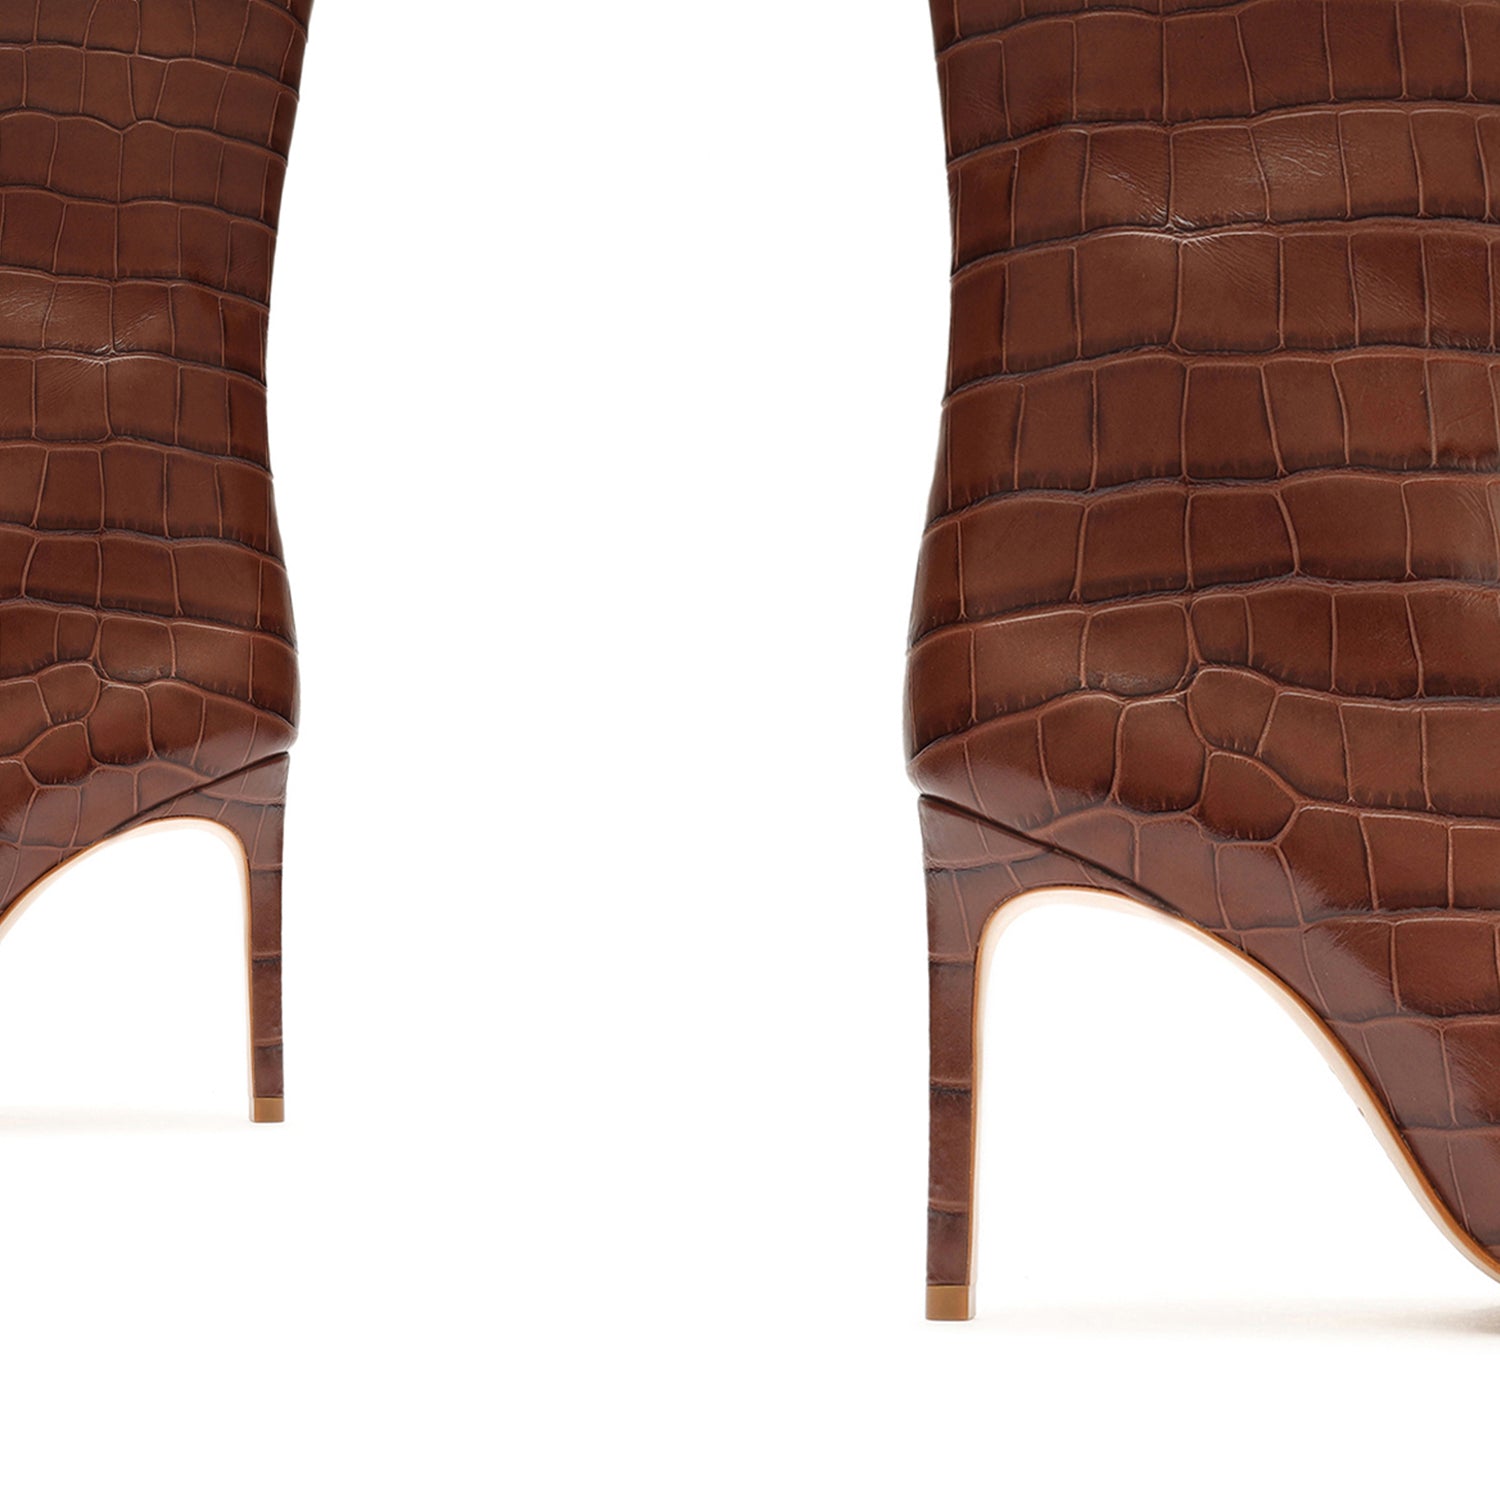 Mary Crocodile Embossed Leather Bootie Booties Pre Fall 22    - Schutz Shoes